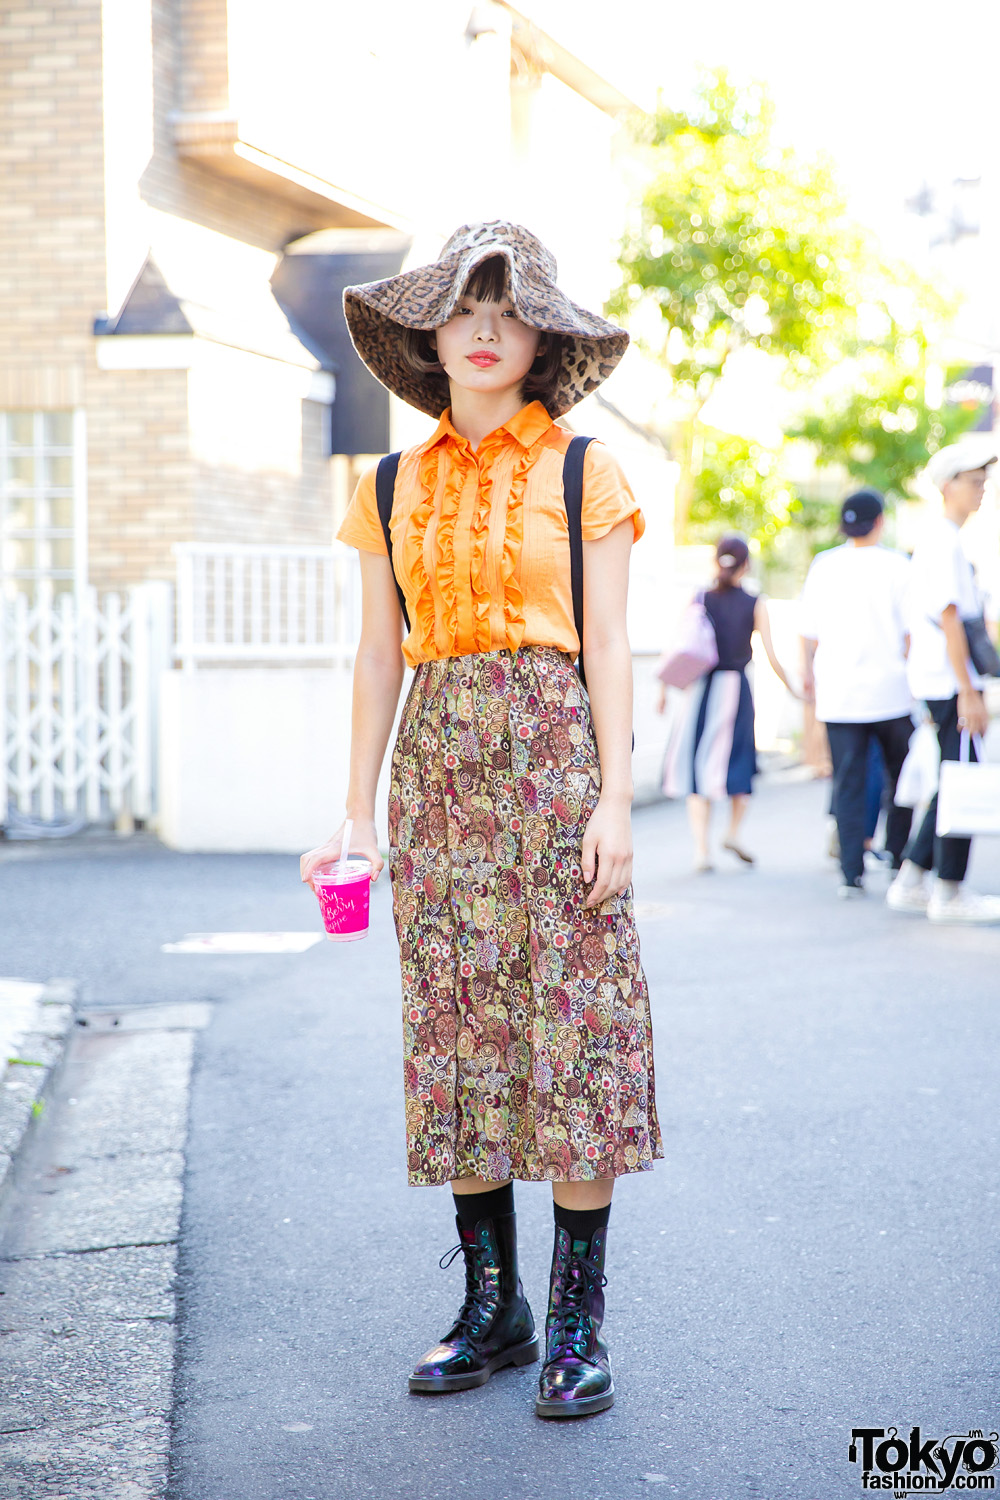 Retro Harajuku Style w/ Ruffle Blouse, Printed Skirt, Dr. Martens Psychedelic Boots, Embroidered Backpack & Floppy Hat